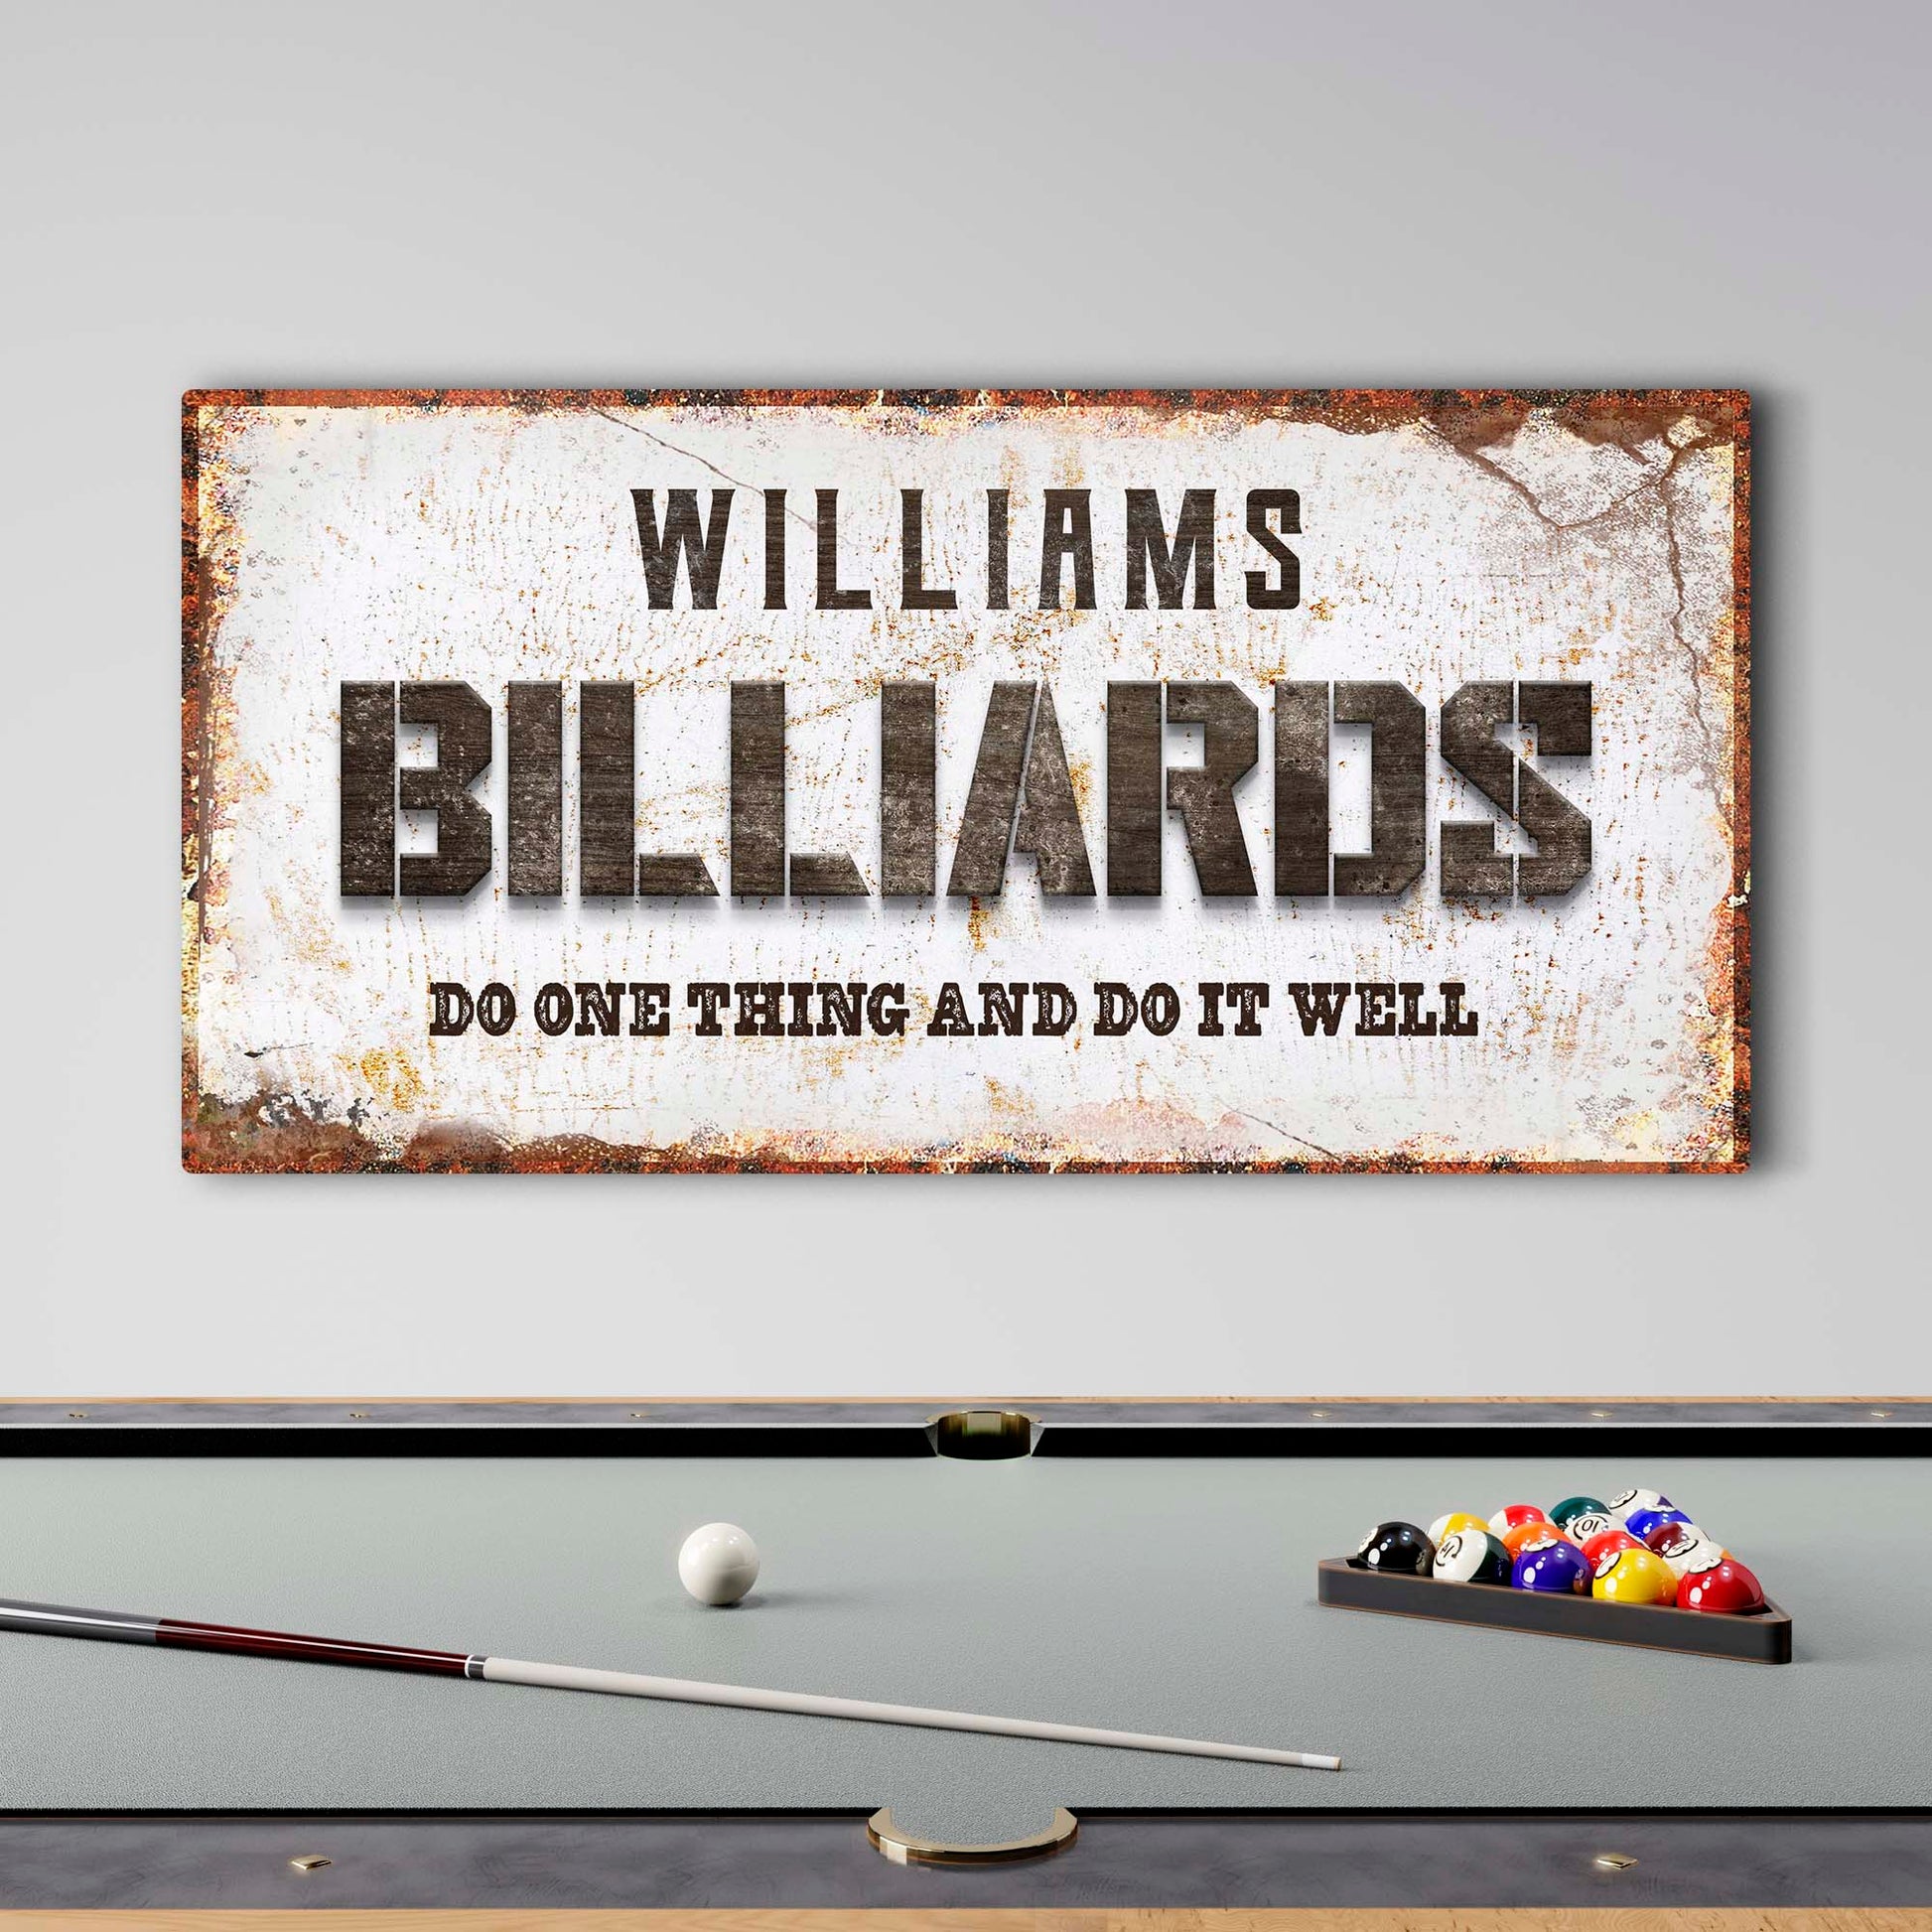 Do One Thing And Do It Well Billiards Sign - Image by Tailored Canvases